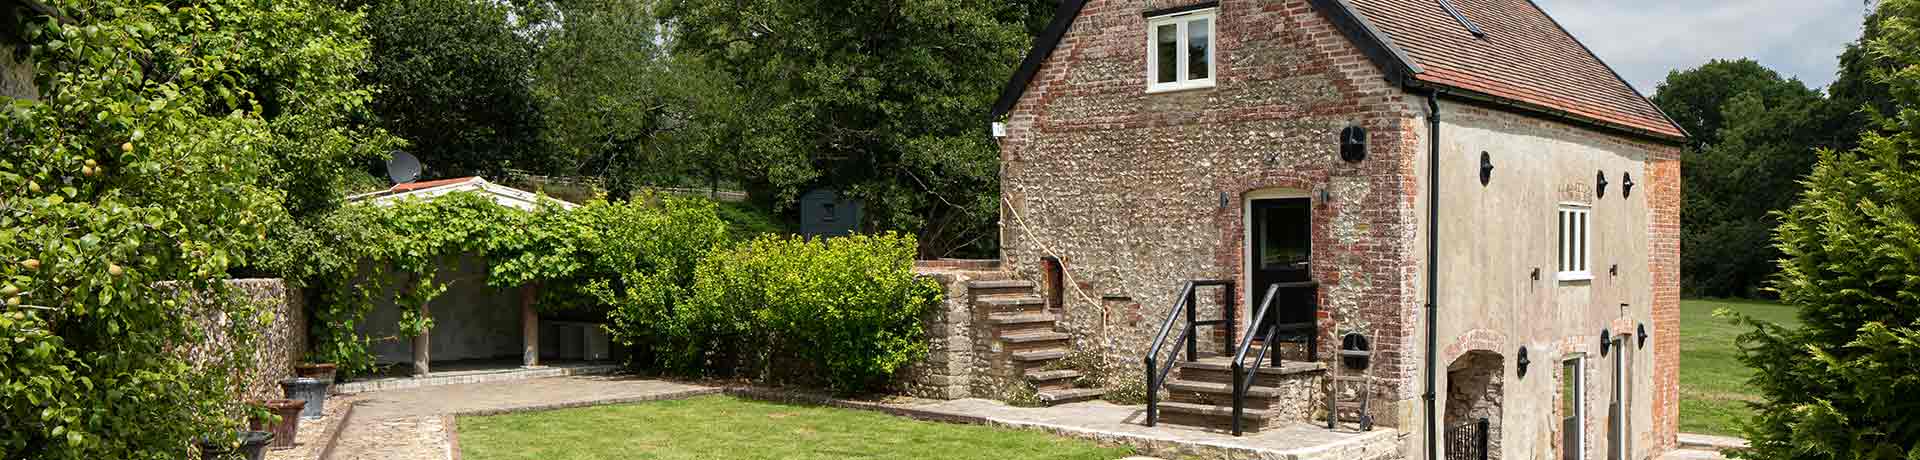 Cottages for 4 people in South England